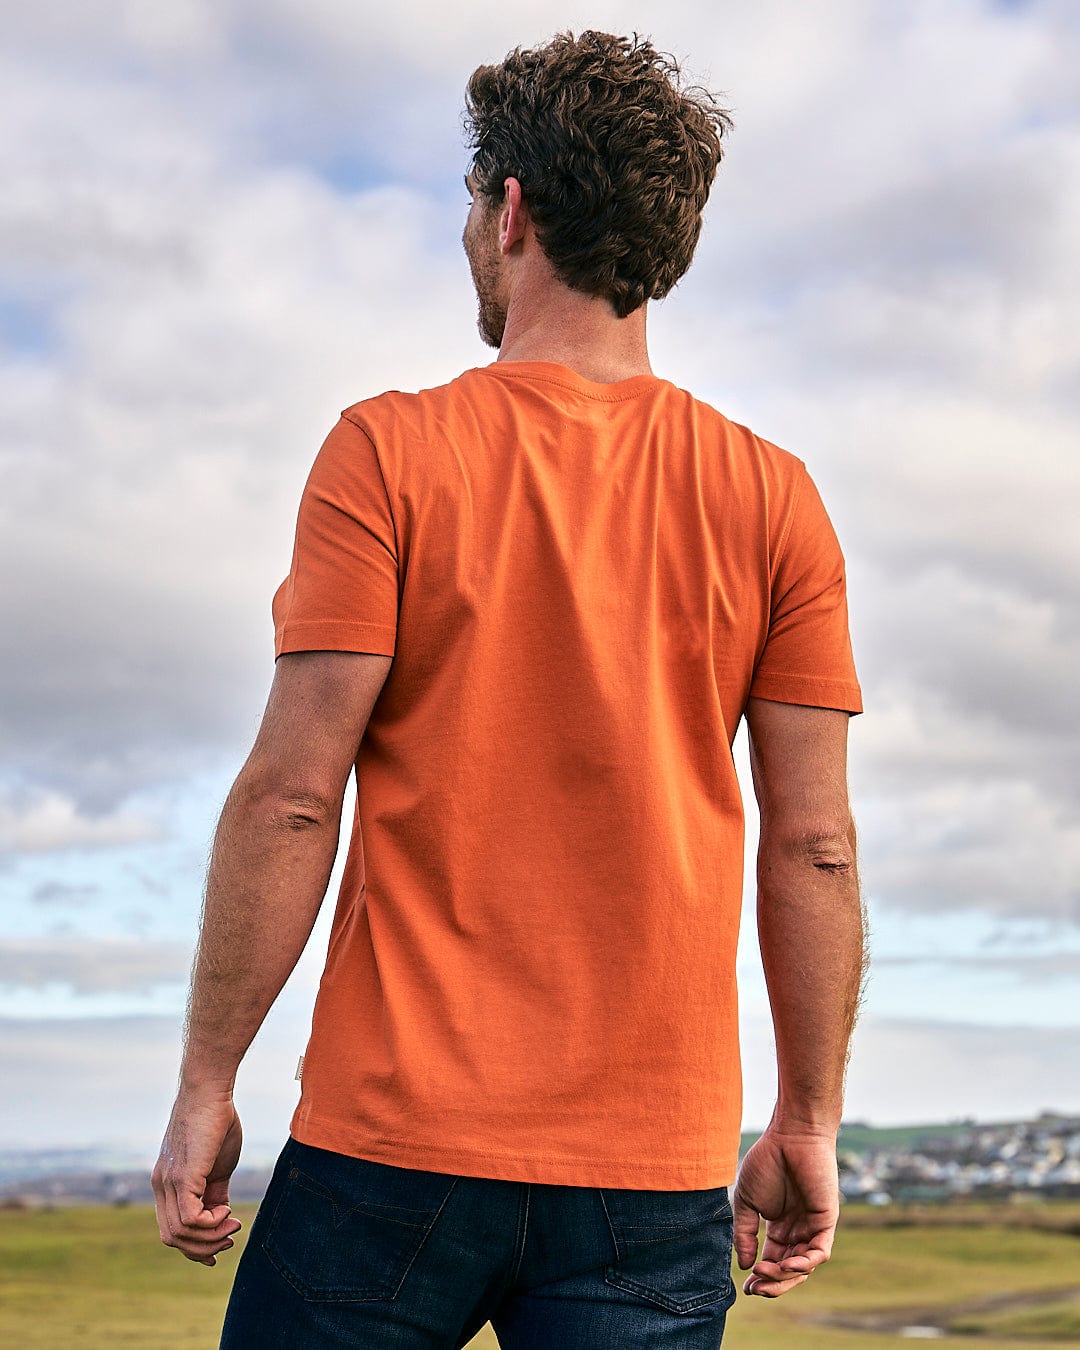 The back of a man in a Saltrock Live Life Location - Mens Short Sleeve T-Shirt - Orange standing in a field.